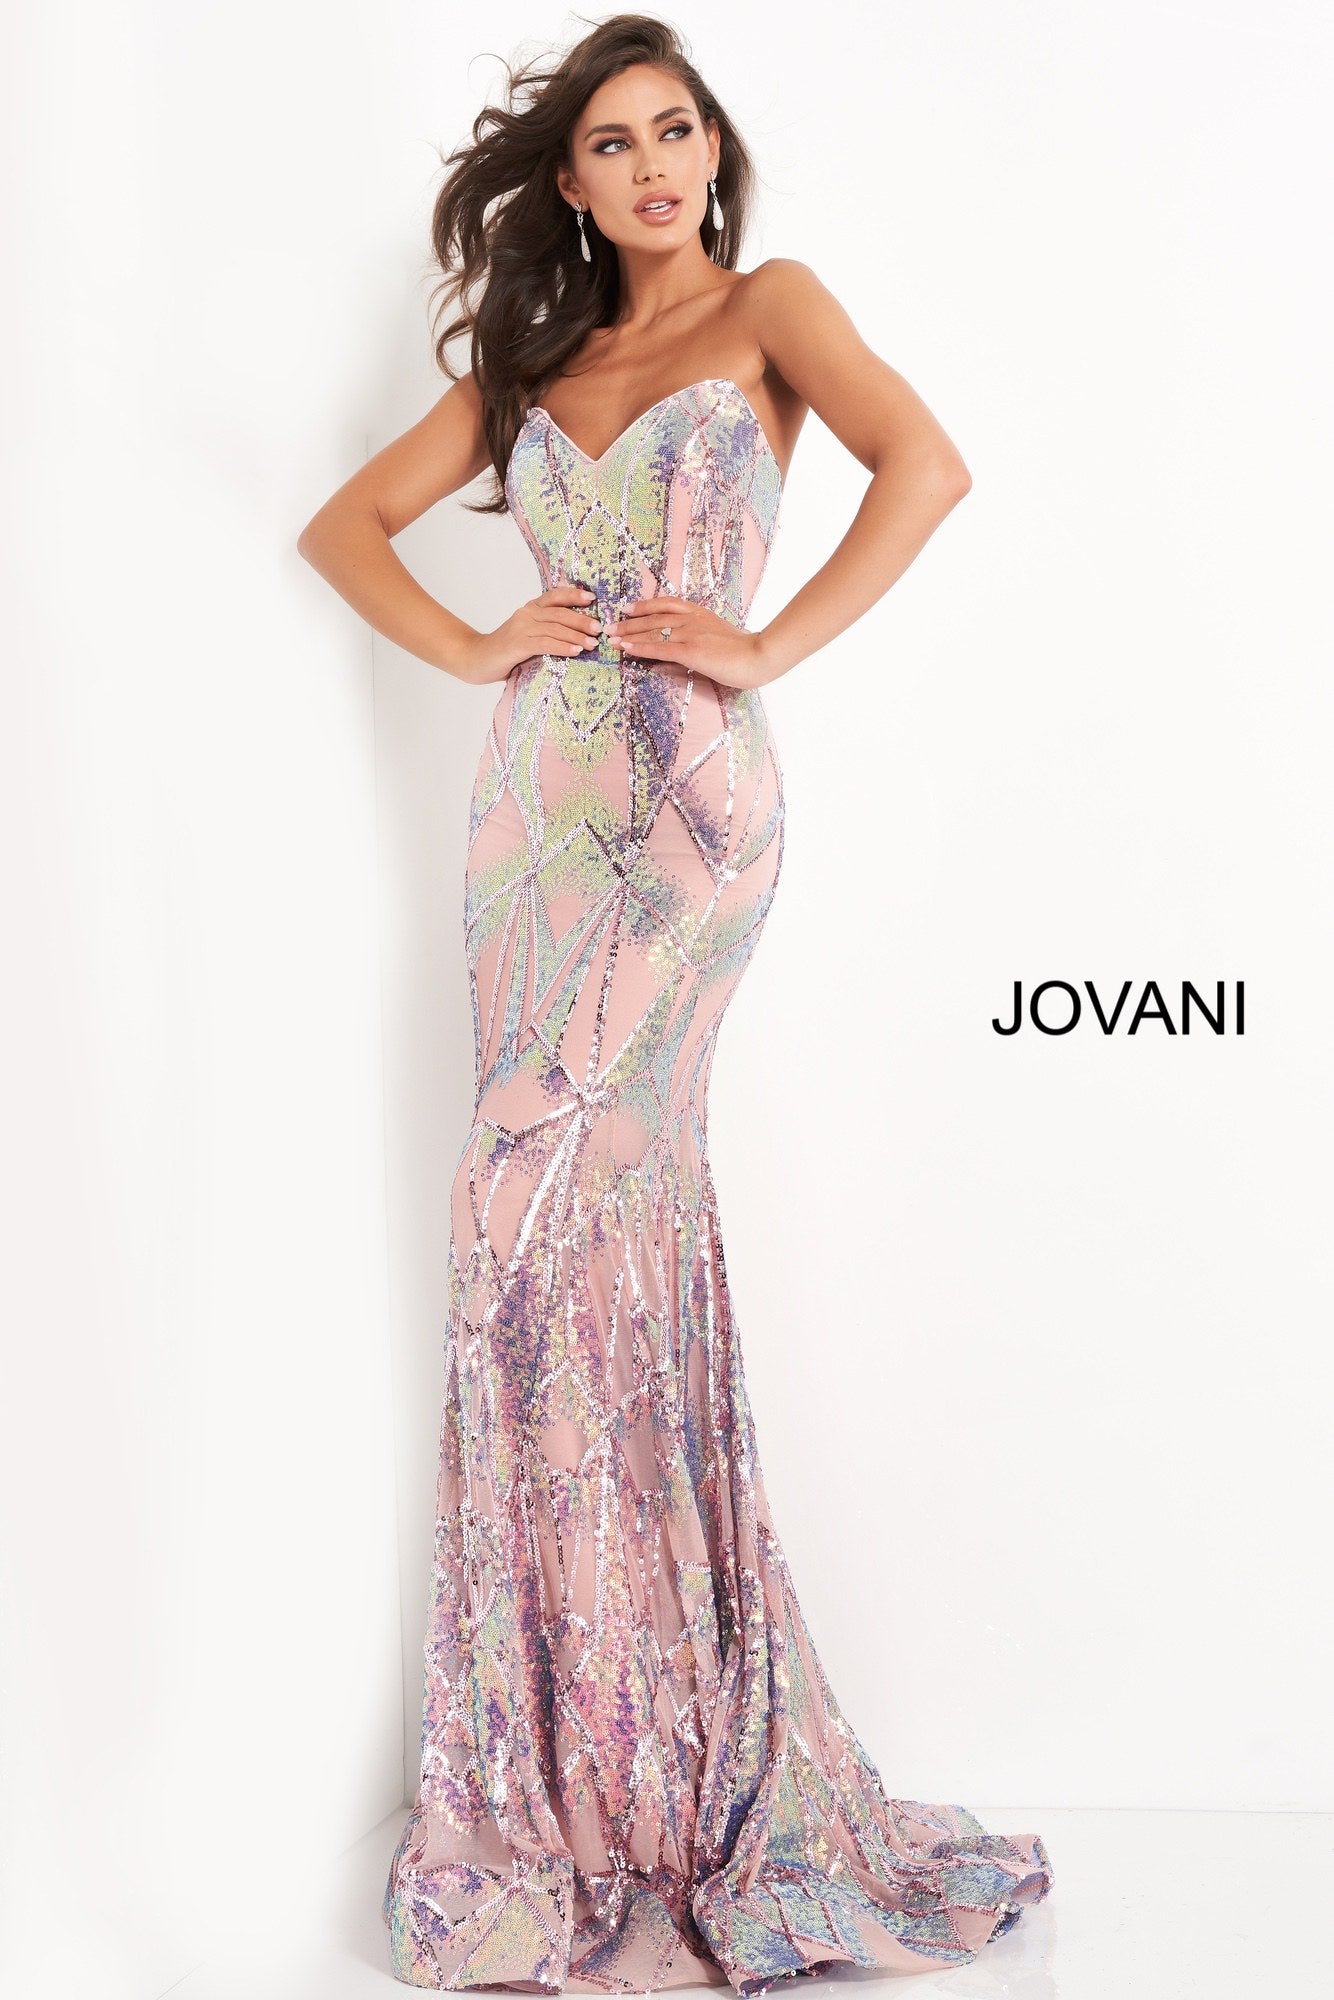 Jovani 05100 is a long Fitted formal evening gown. Featuring a strapless peak - deep sweetheart neckline. This stunning Pageant & Prom Gown is Fully Embellished with Glitter & Sequins to Create A Glamorous Geometric dimensional design. Mermaid silhouette with a lush trumpet skirt & sweeping train.  Available Sizes: 00,0,2,4,6,8,10,12,14,16,18,20,22,24  Available Colors: black/multi, light-blue, navy, pink